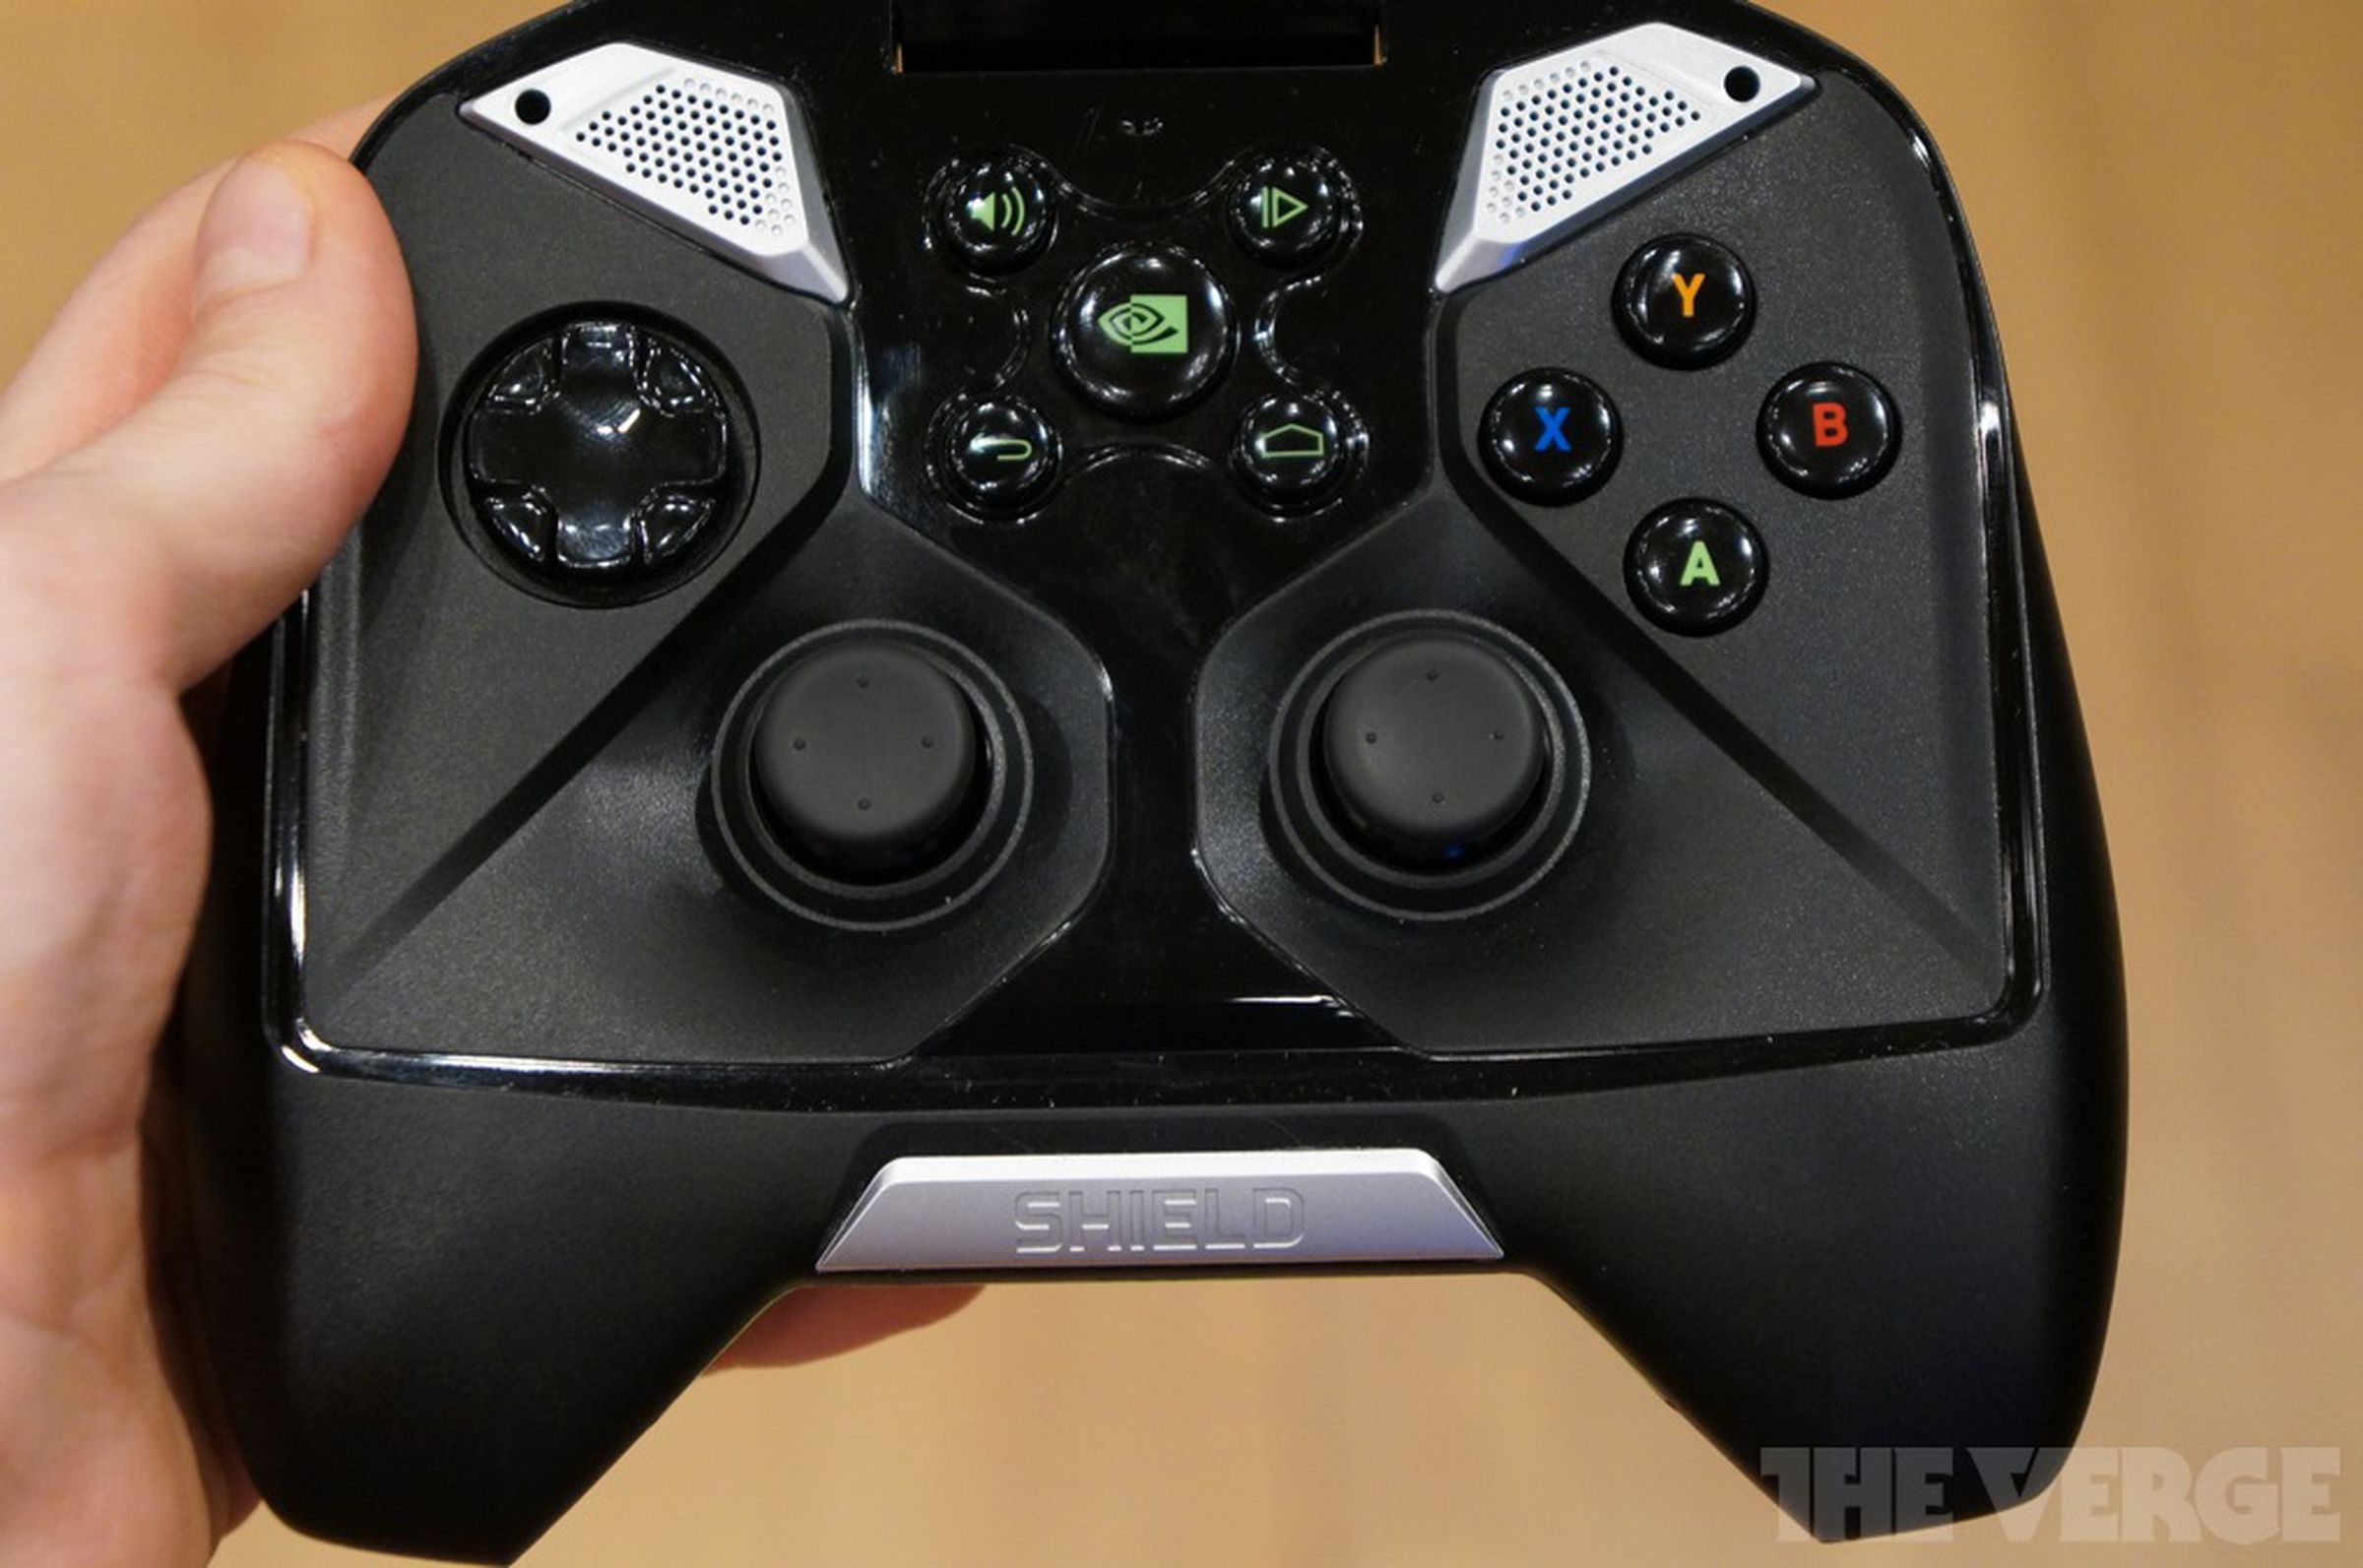 Nvidia Shield first production unit (hands-on)